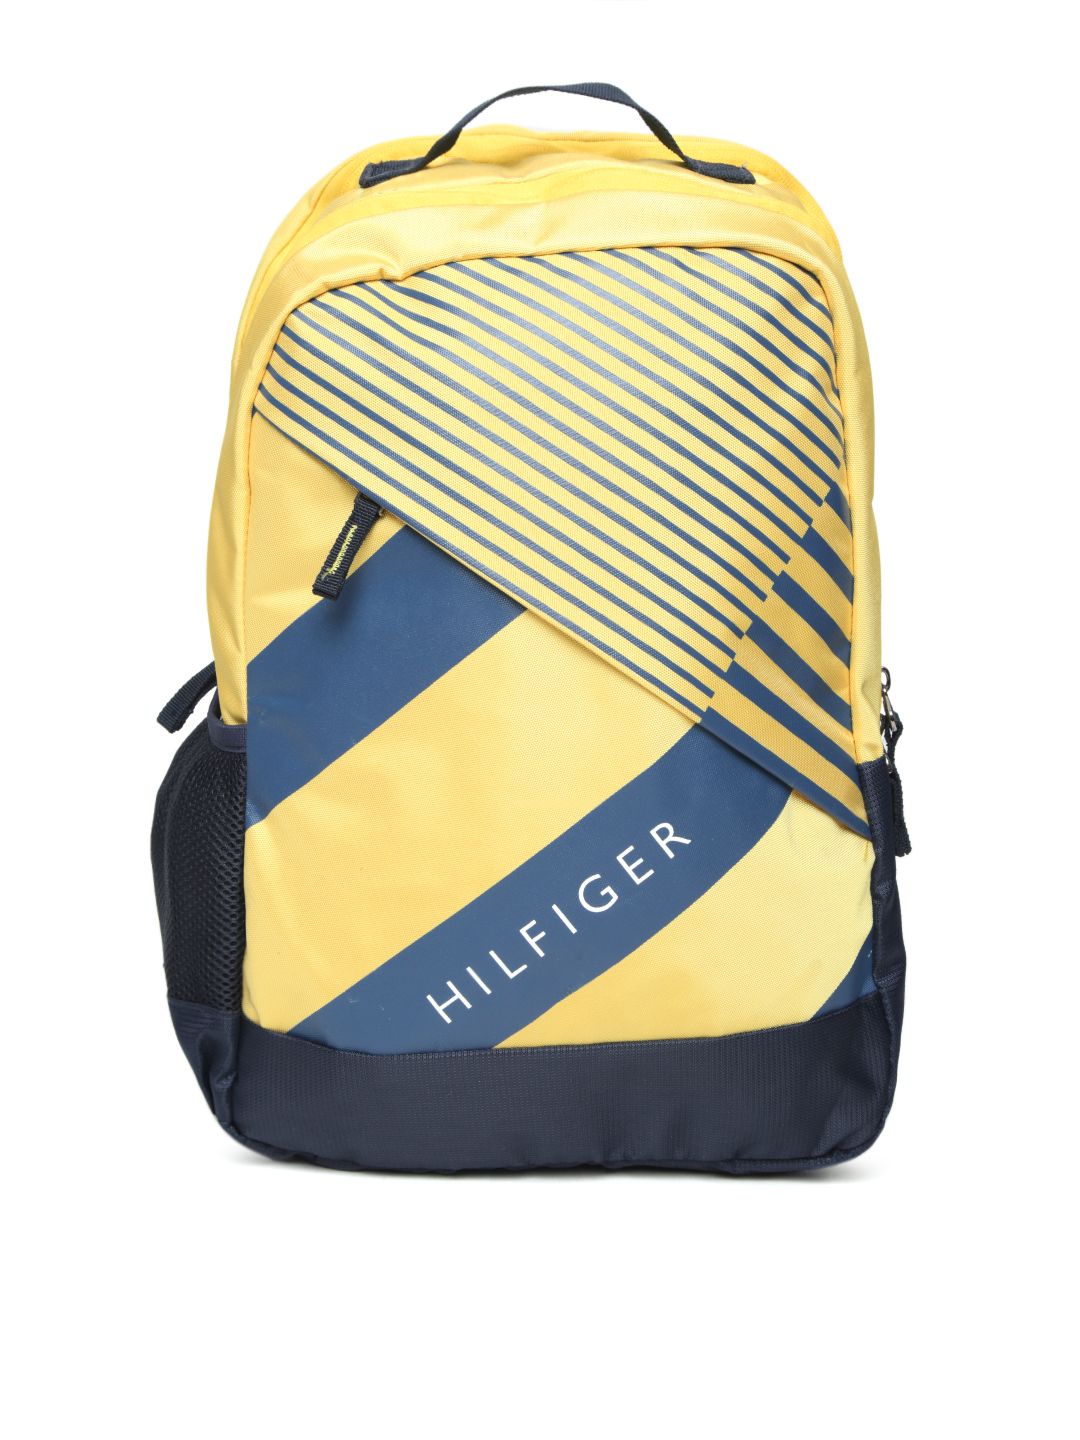 Tommy Hilfiger Unisex Yellow & Navy Blue Printed Laptop Backpack Price in India